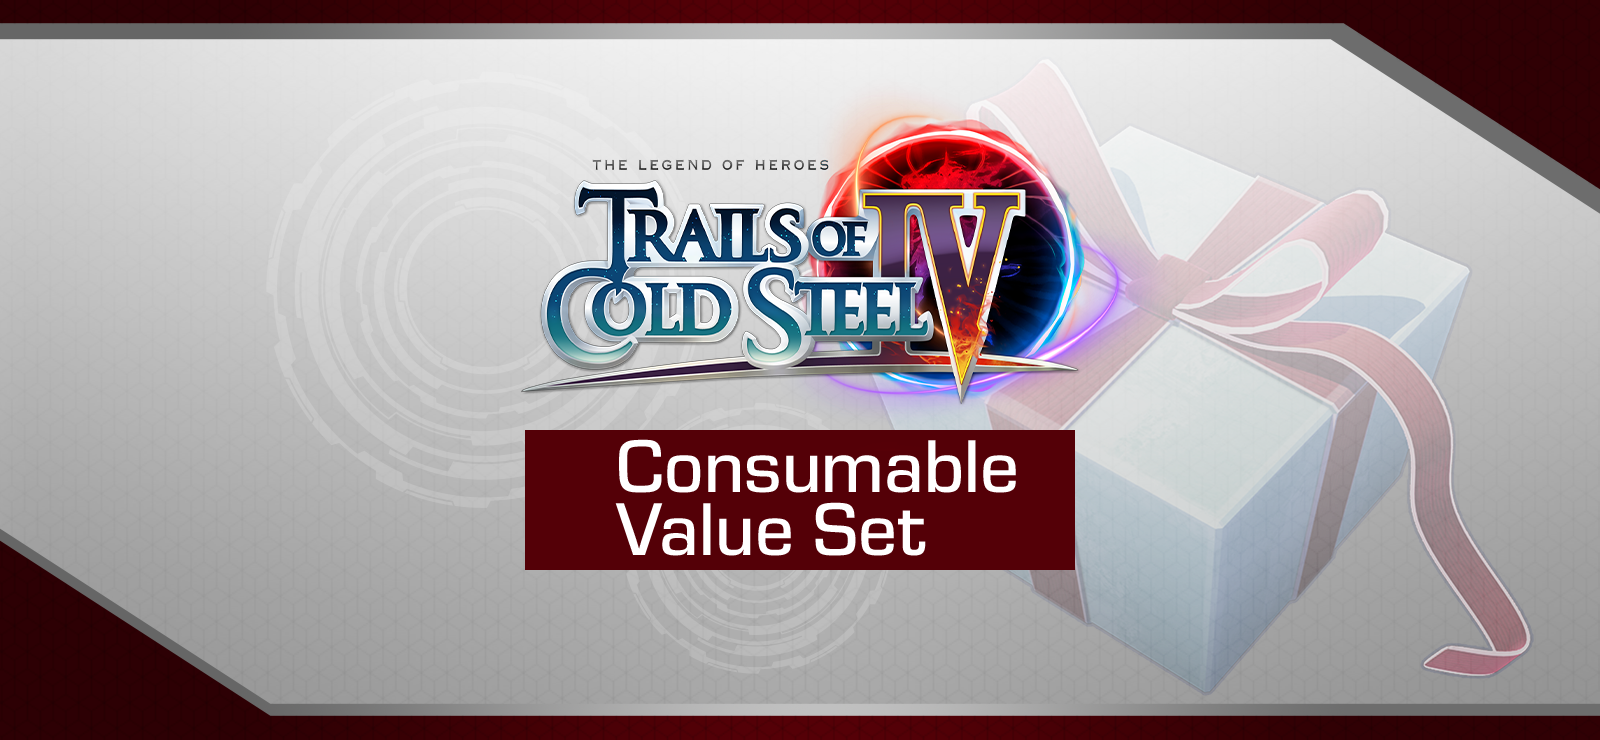 The Legend Of Heroes: Trails Of Cold Steel IV - Consumable Value Set